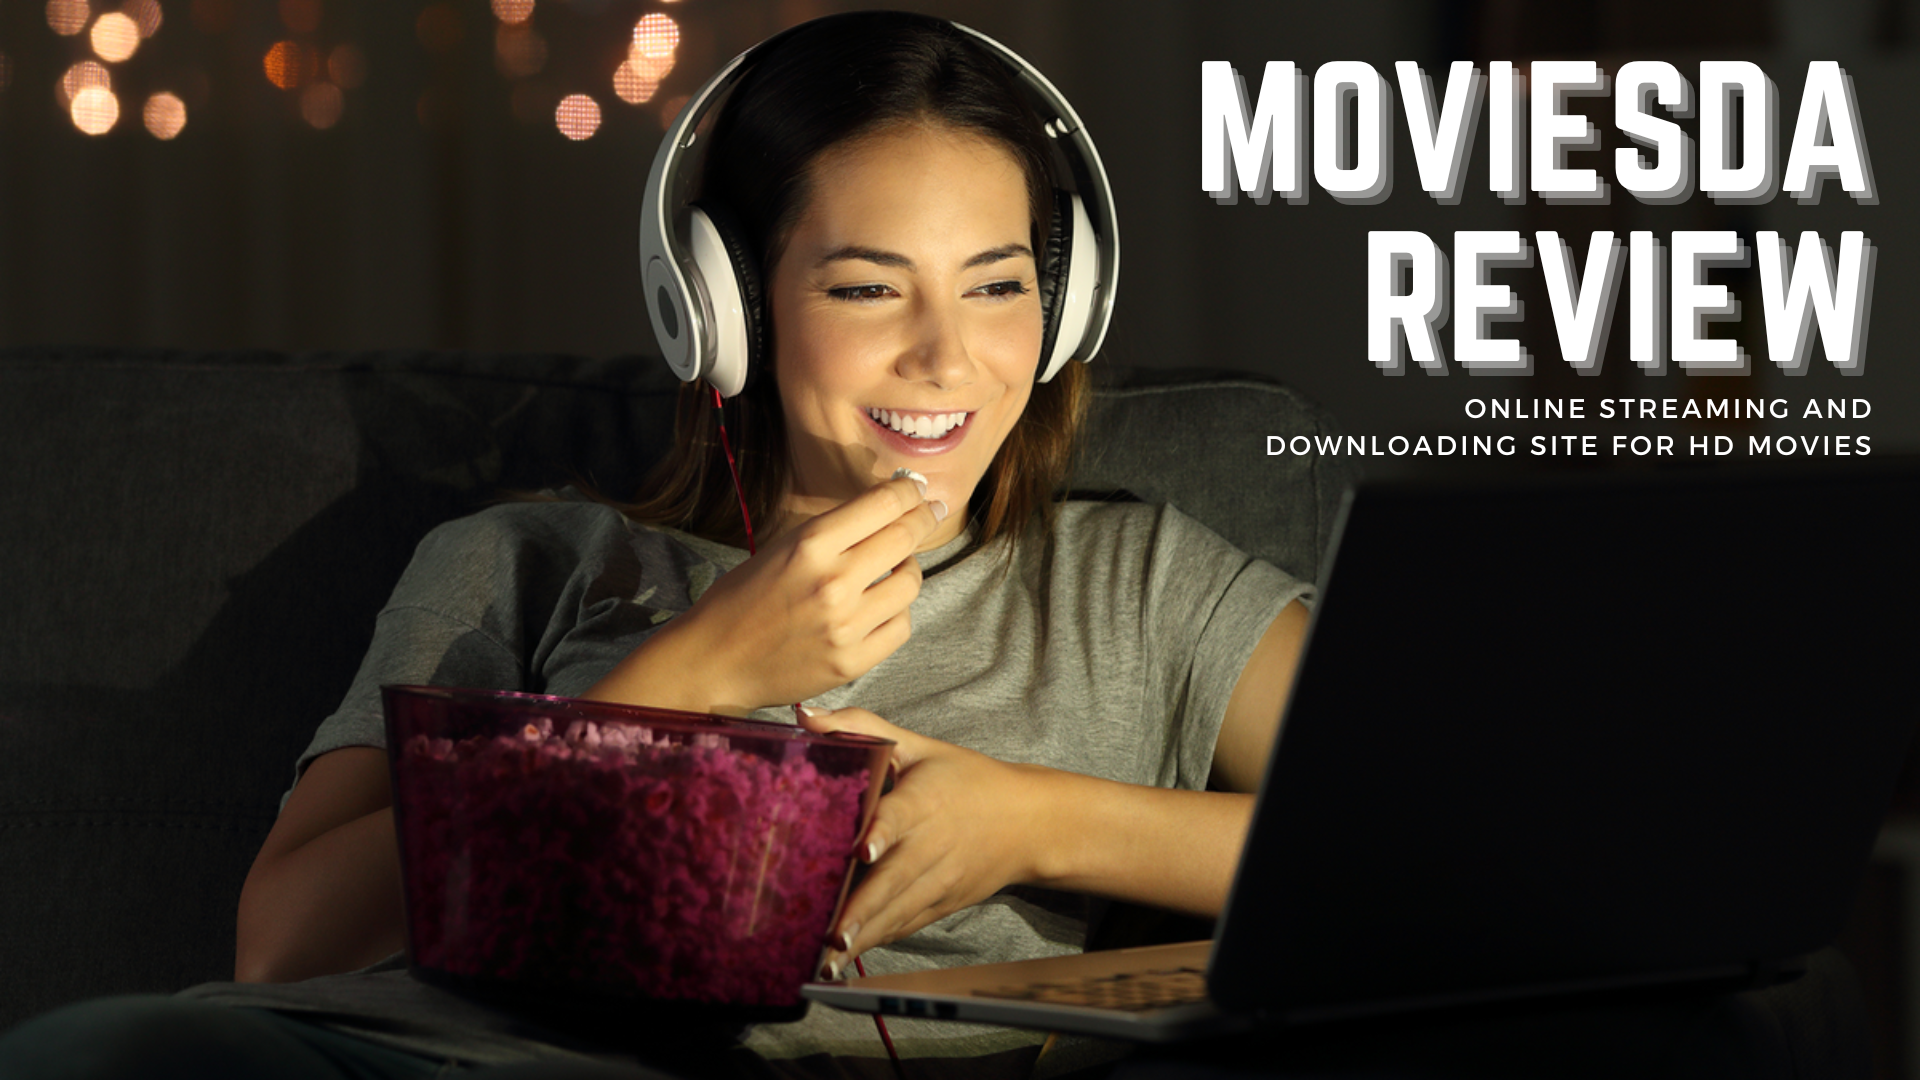 Moviesda Review - Online Streaming And Downloading Site For HD Movies